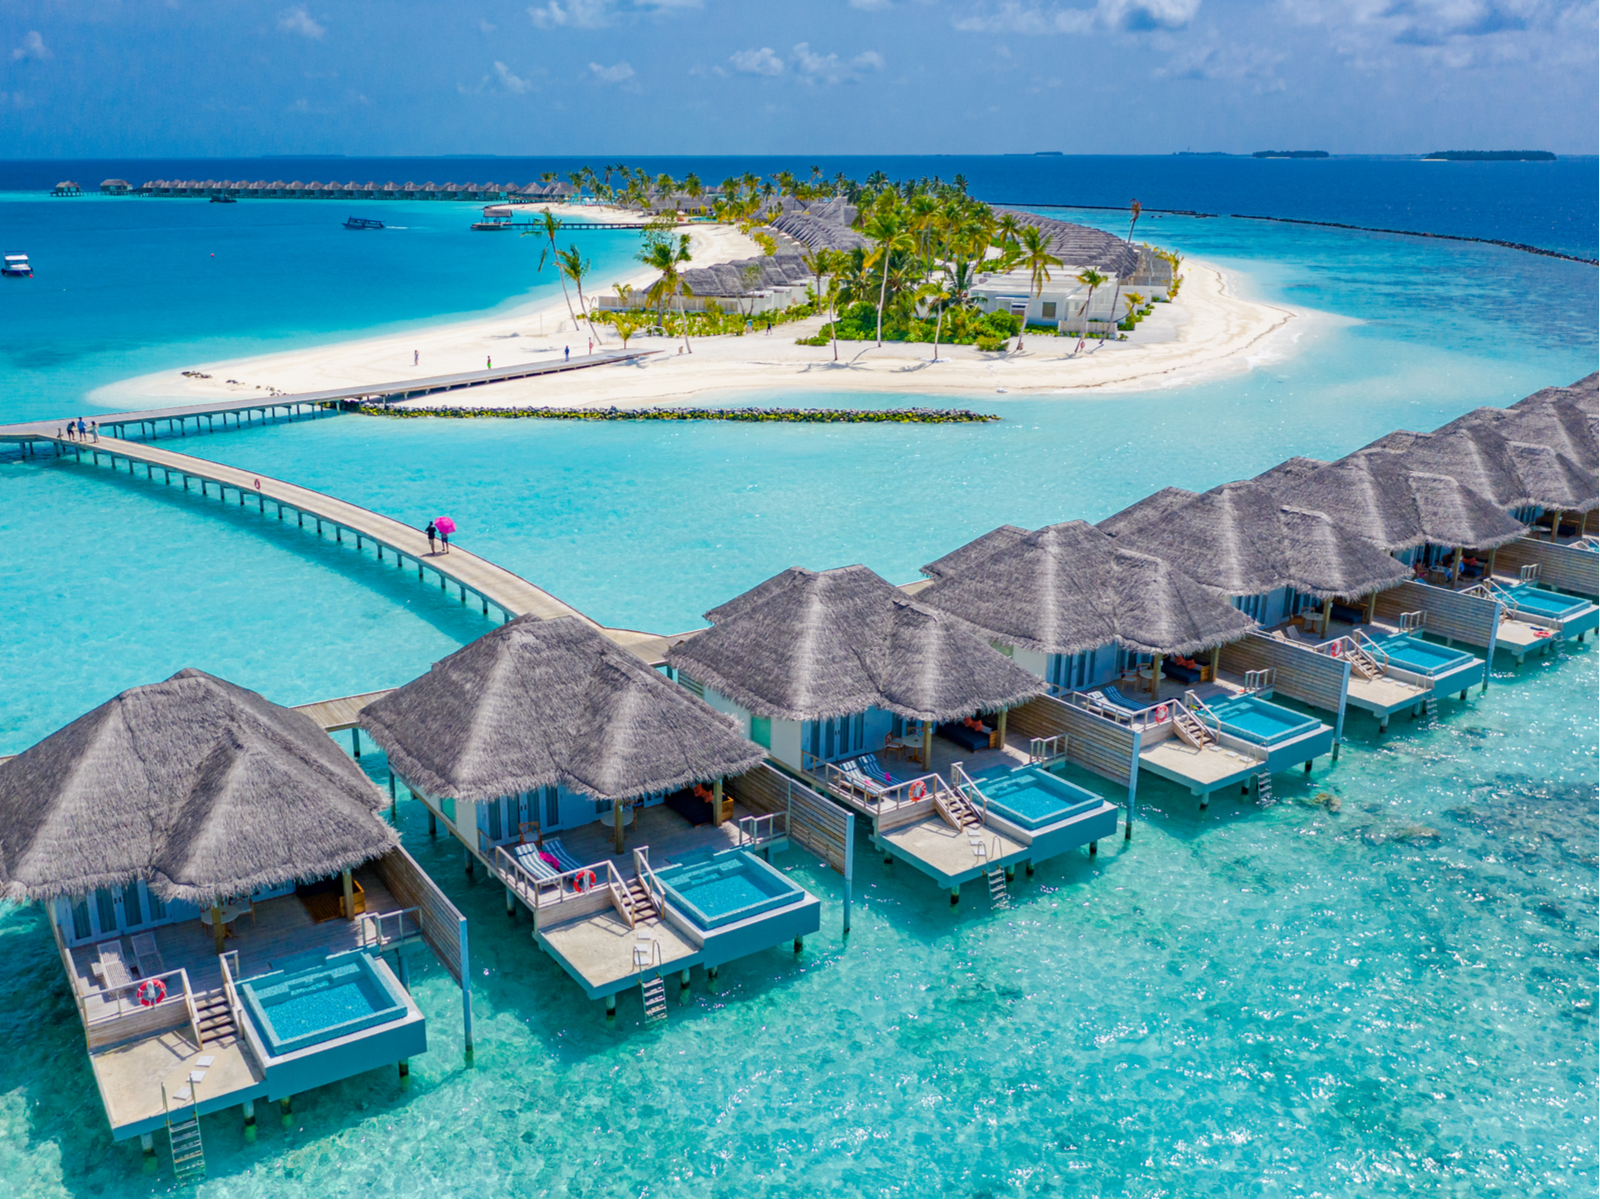 Aerial view of over-water huts in the Maldives, one of the world's best island vacations